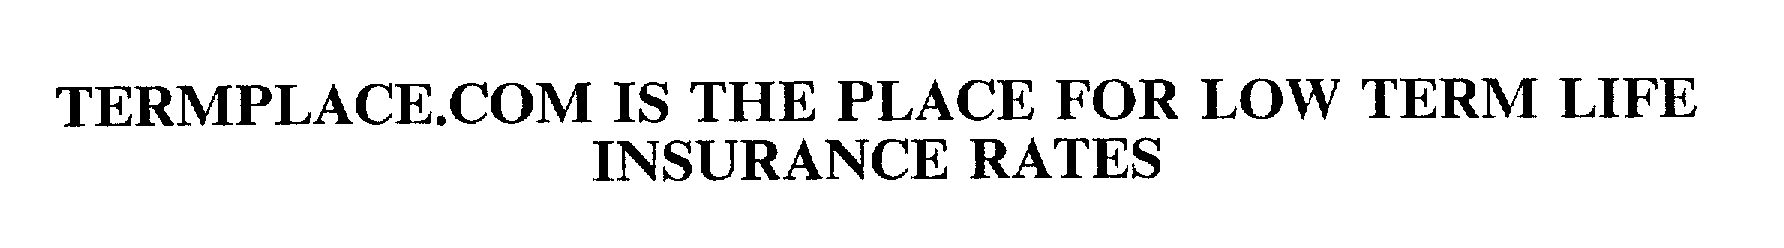 Trademark Logo TERMPLACE.COM IS THE PLACE FOR LOW TERM LIFE INSURANCE RATES